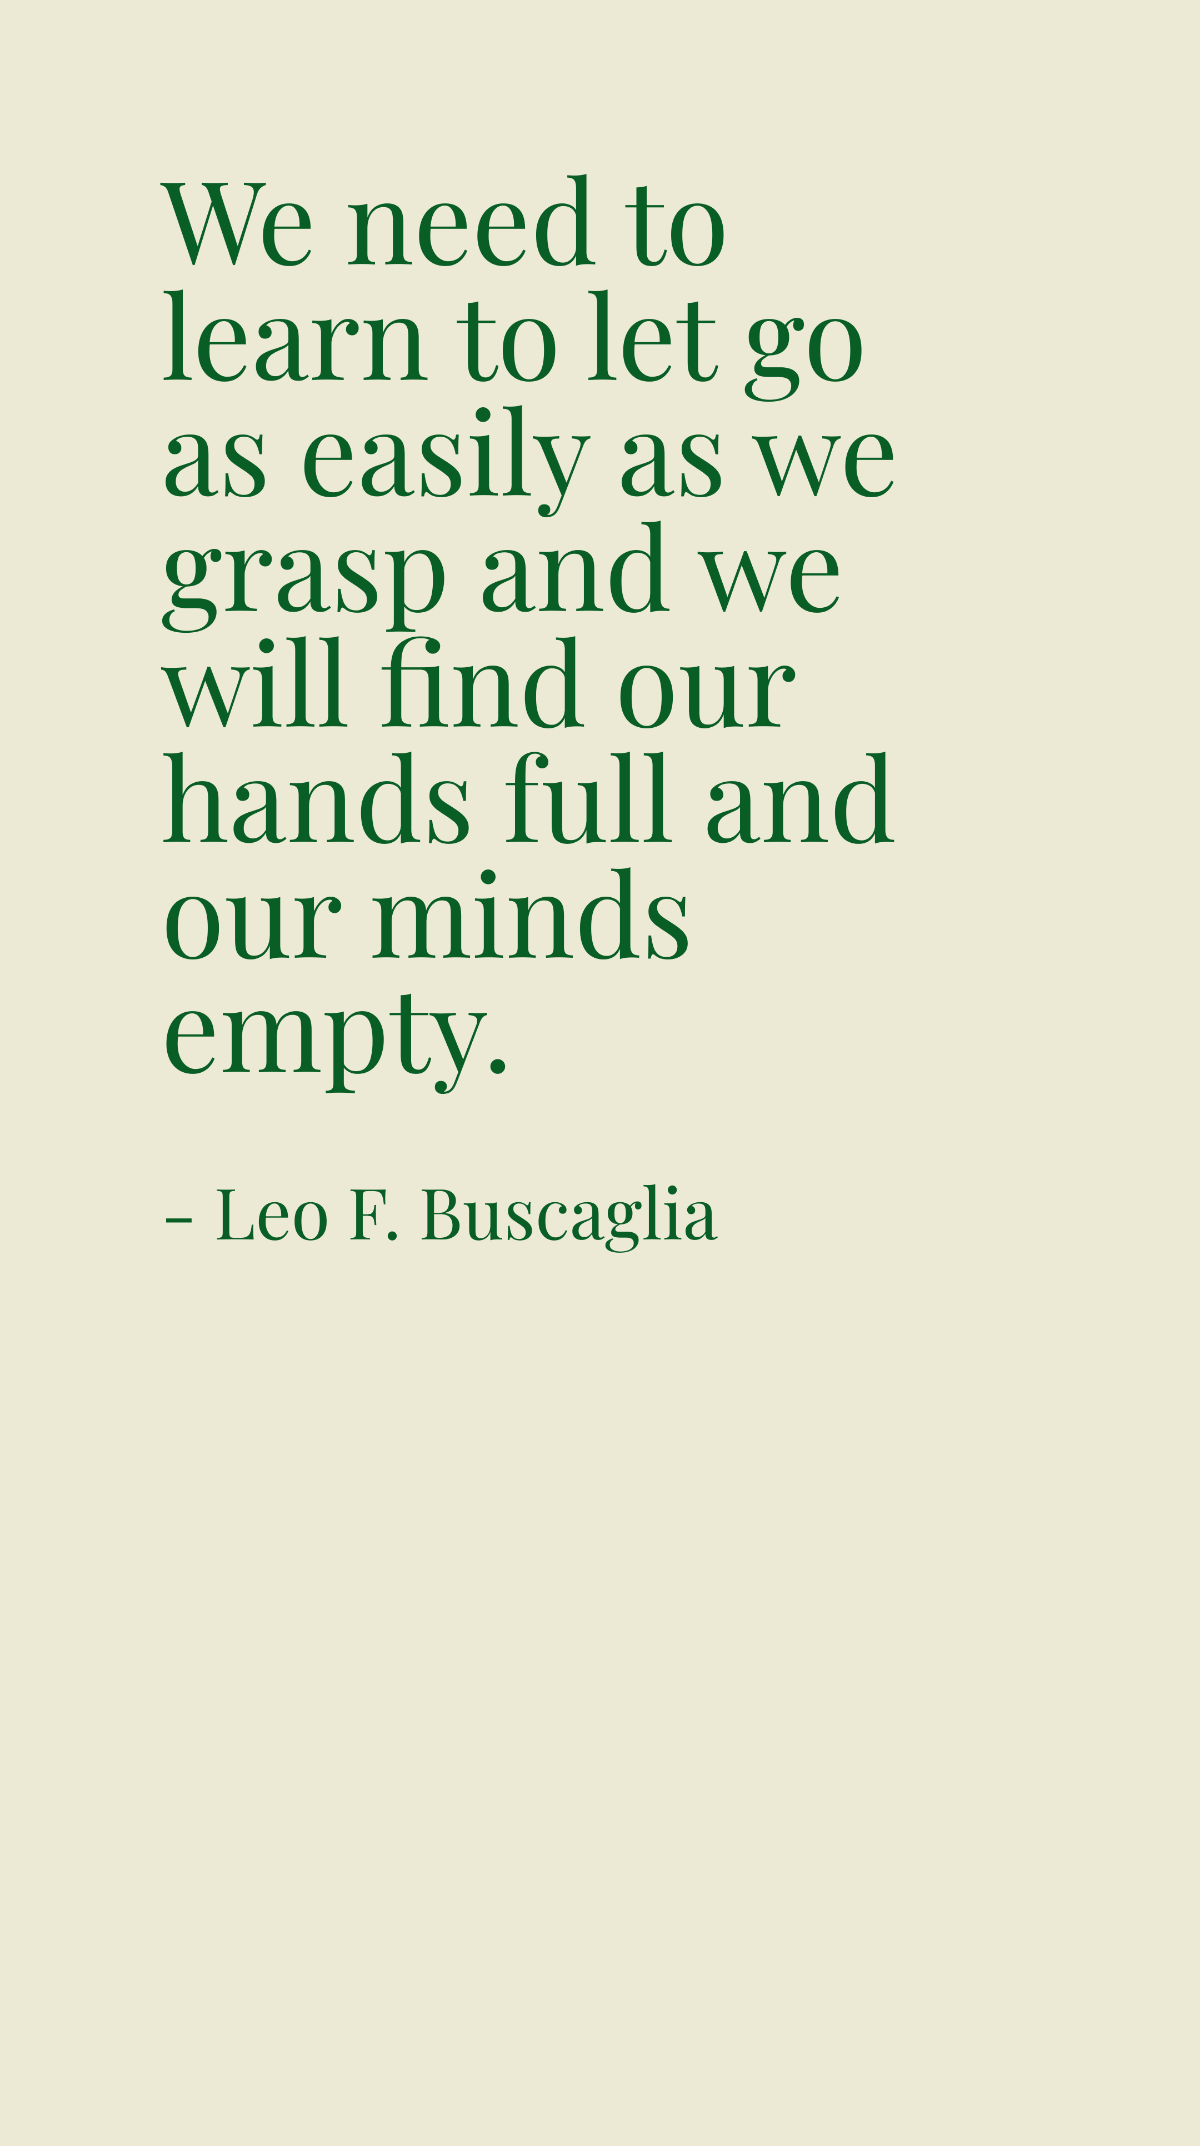 Leo F. Buscaglia - We need to learn to let go as easily as we grasp and we will find our hands full and our minds empty.